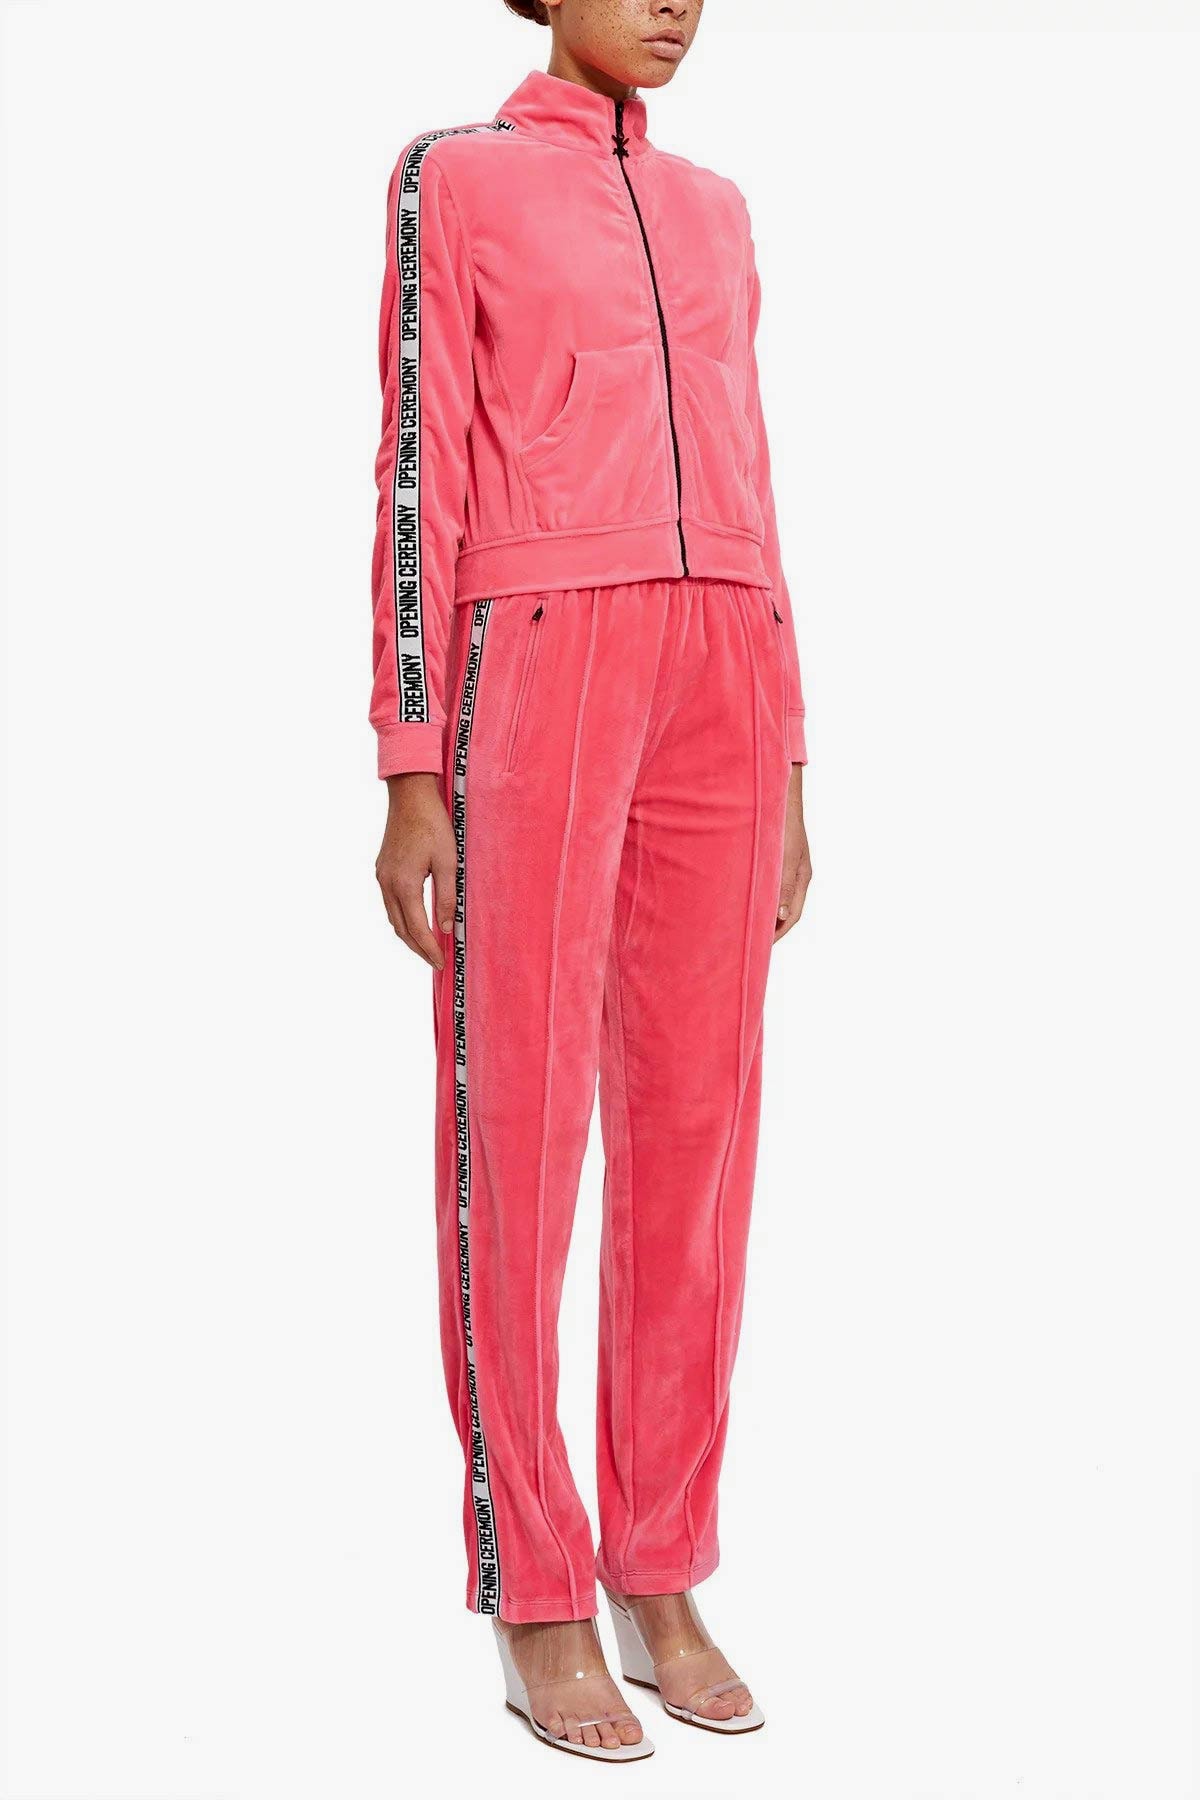 Opening Ceremony TORCH Pink Tracksuit